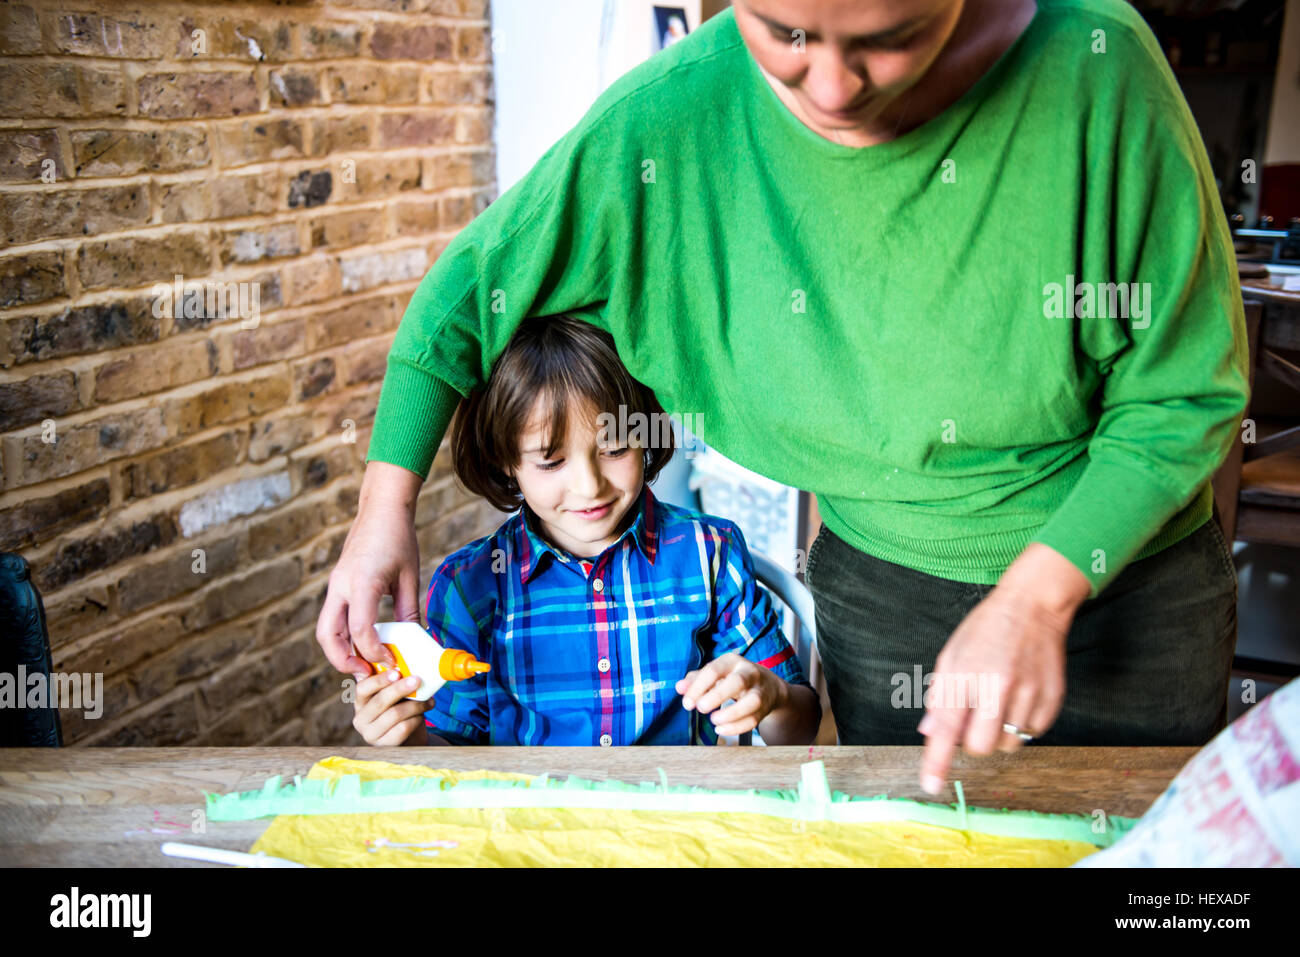 Mother helping son spread glue on crepe paper to make pinata Stock Photo